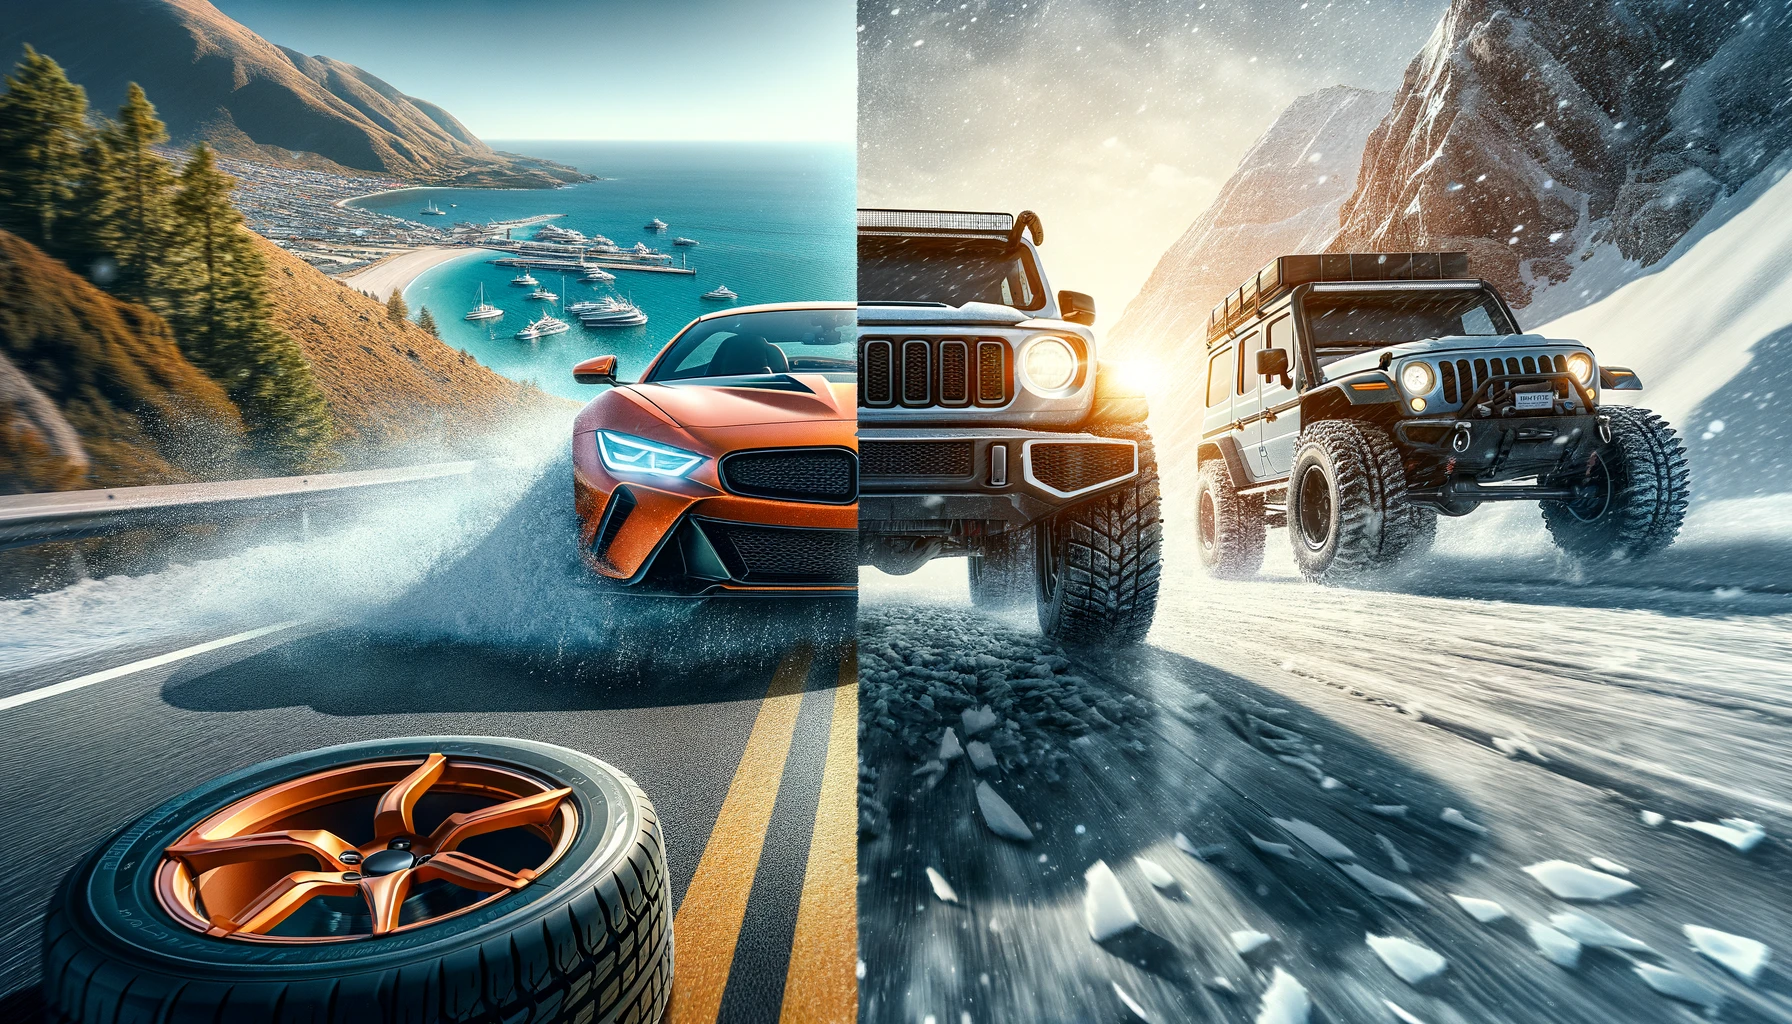 A dynamic split-image showcasing both Pirelli summer and studded winter tires. On the left, a sporty car equipped with Pirelli summer tires drives along a sunny coastal road, highlighting the tires' grip and performance in warm weather. On the right, a rugged vehicle with Pirelli studded winter tires navigates a snowy mountain pass, demonstrating the tires' reliability and traction in cold, icy conditions. The scene captures the versatility and excellence of Pirelli tires in different seasonal settings. The image is in a 16:9 aspect ratio.